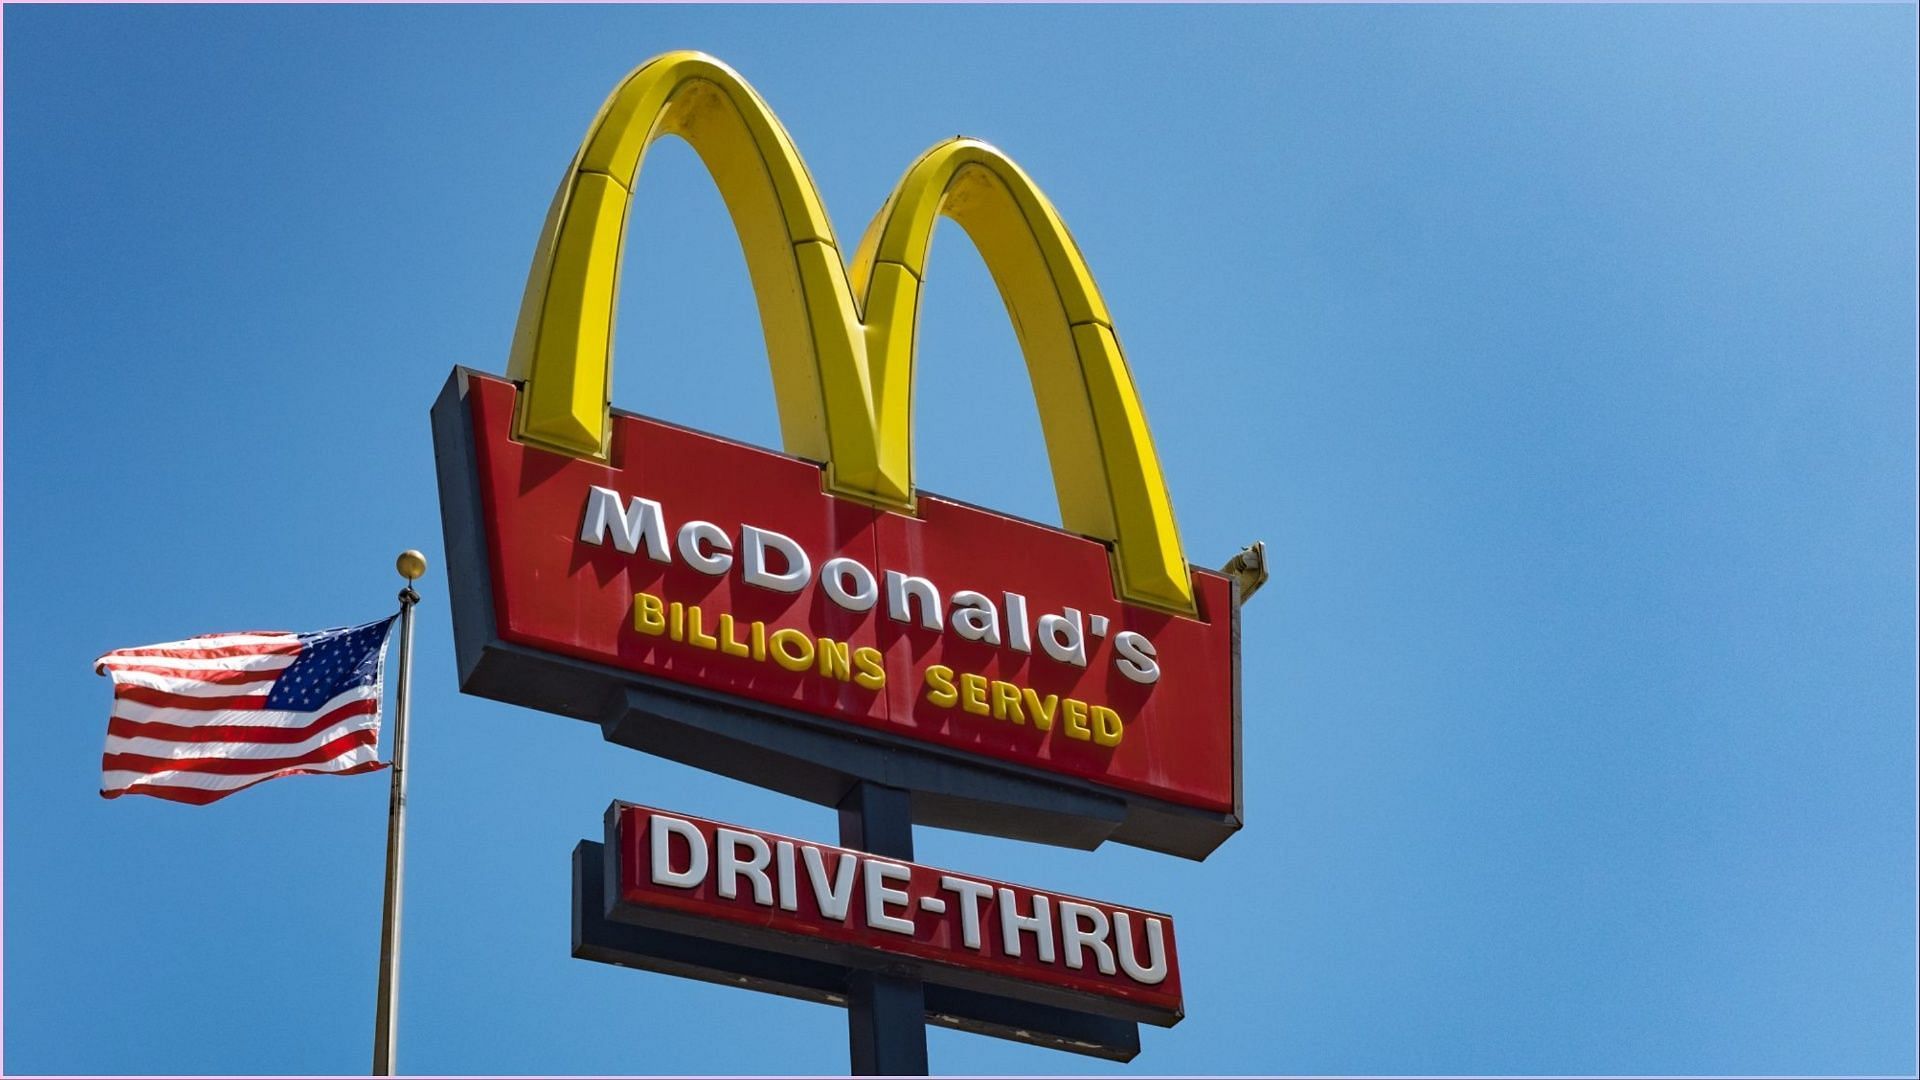 Signs at a McDonald&rsquo;s restaurant in the United States (Image via EPics/Getty Images)